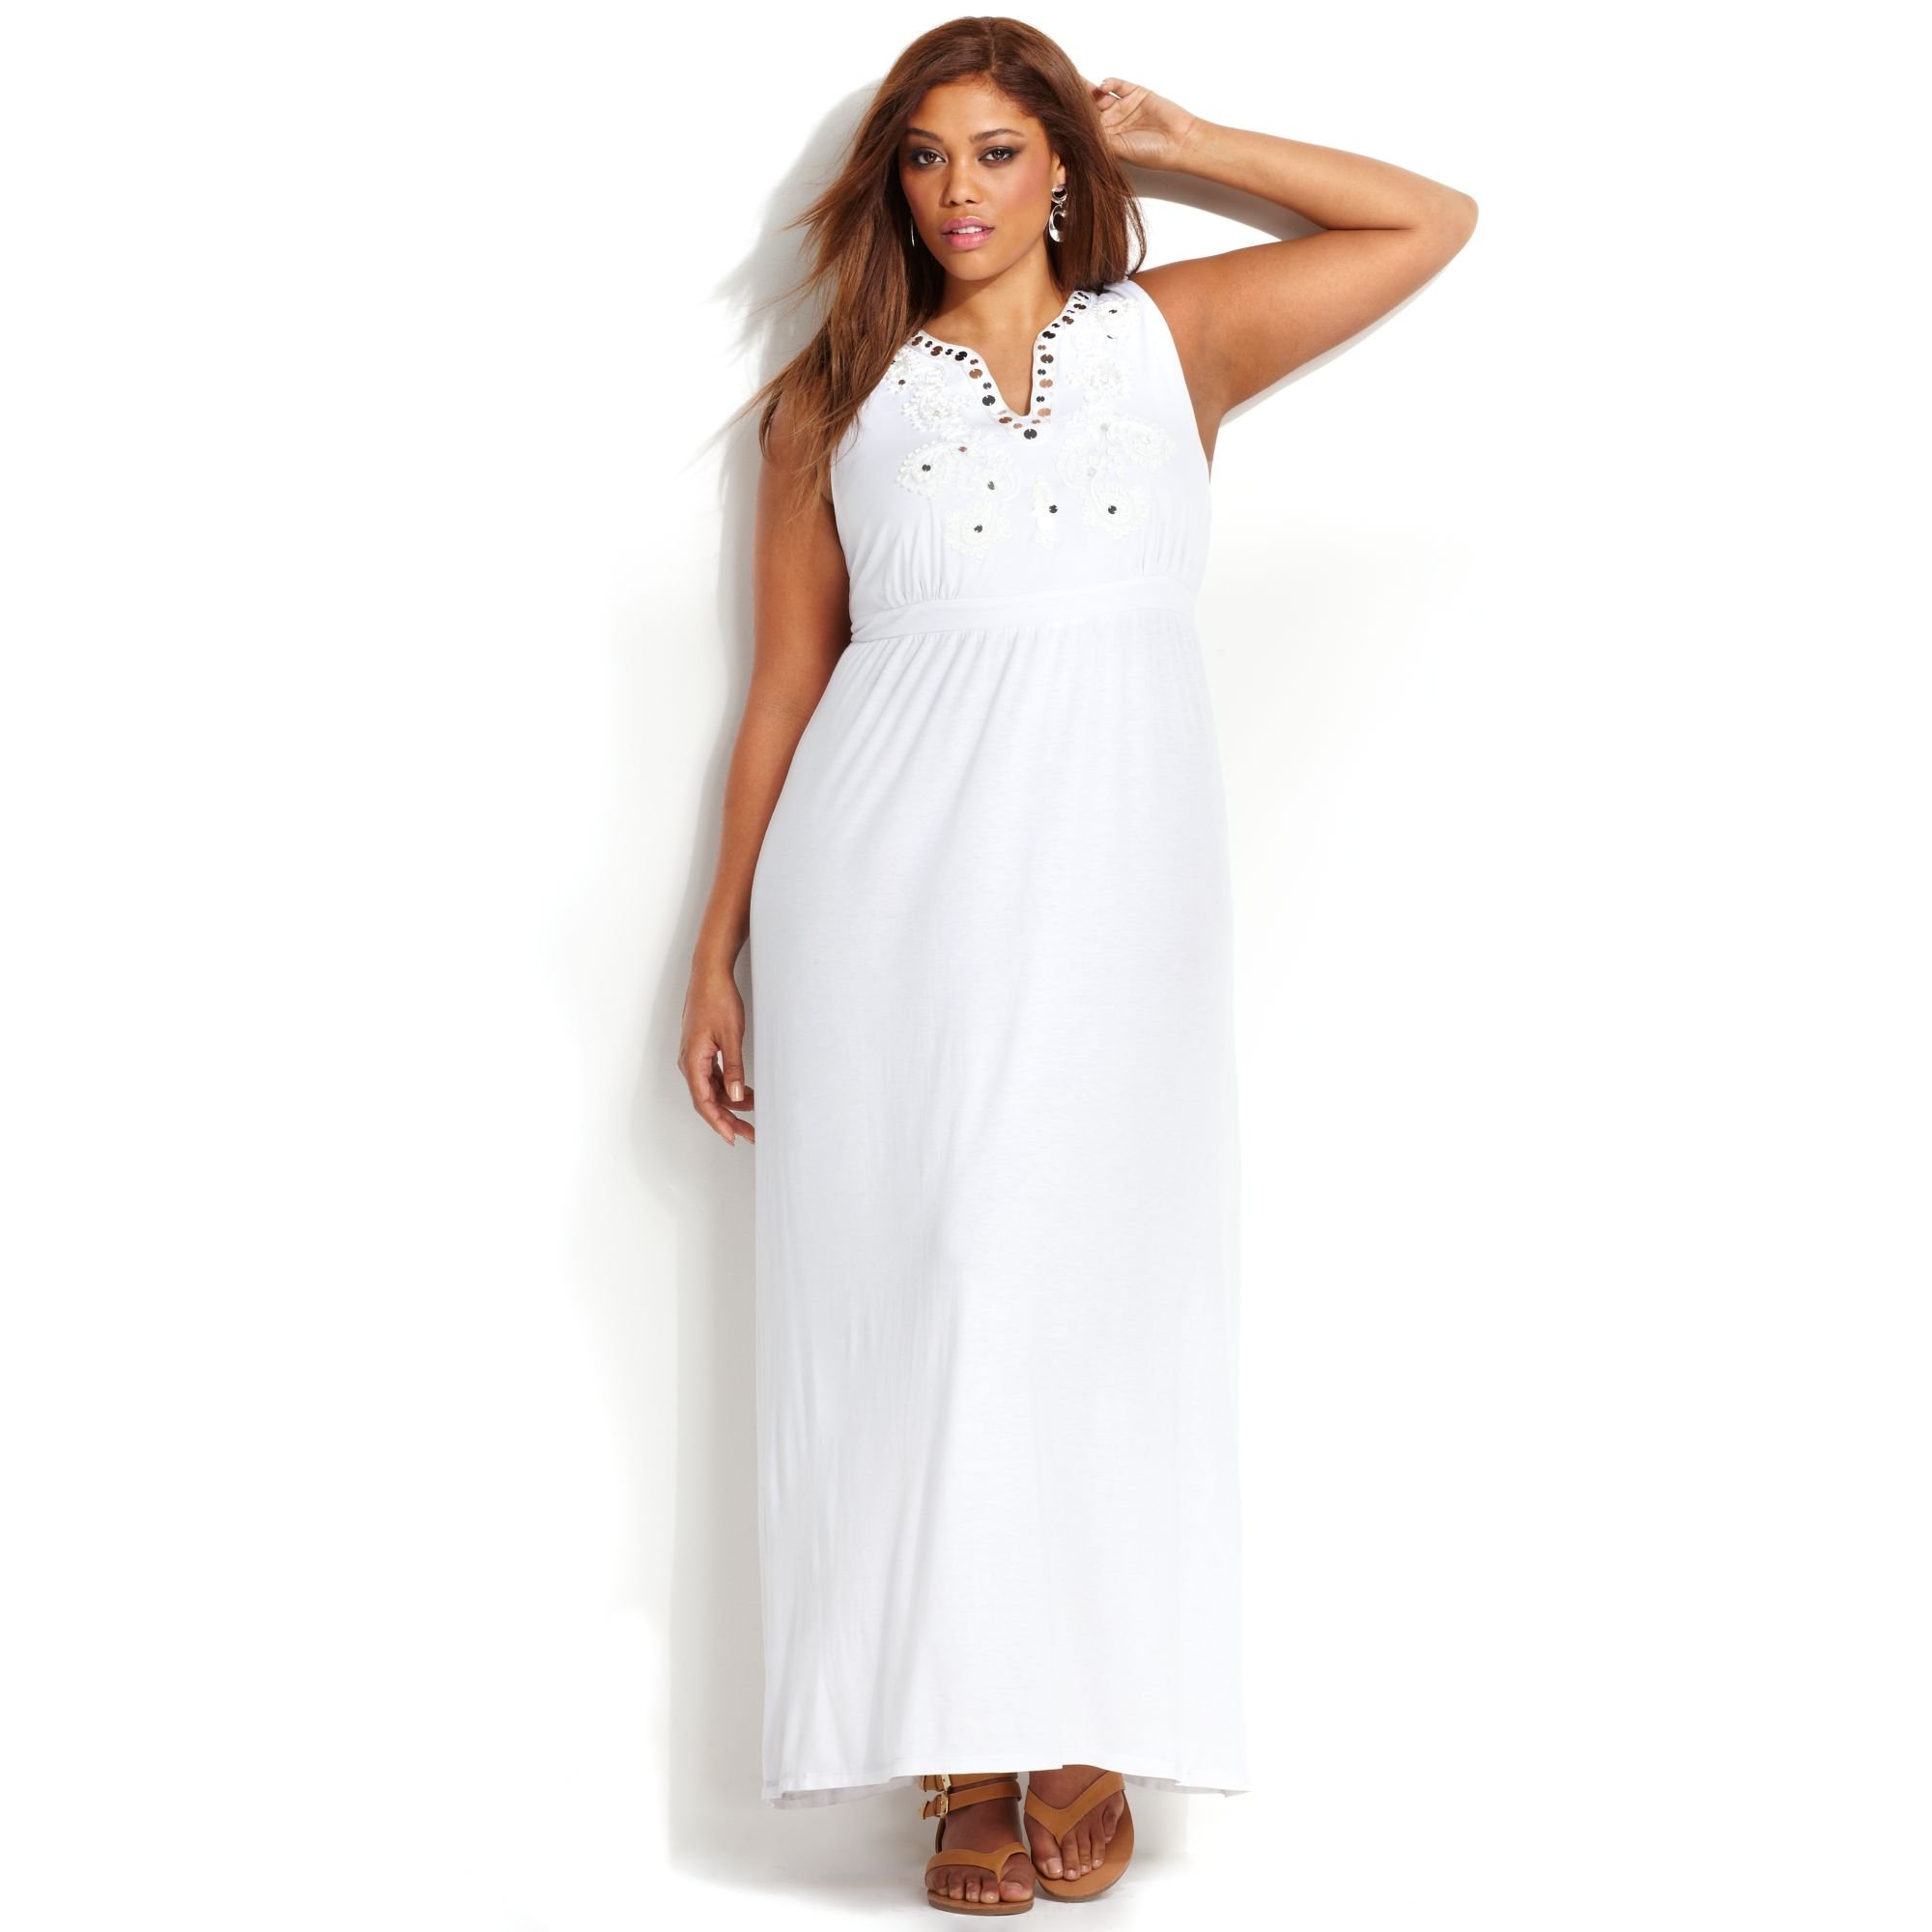 Lyst - Inc International Concepts Plus Size Embroidered Maxi Dress in White